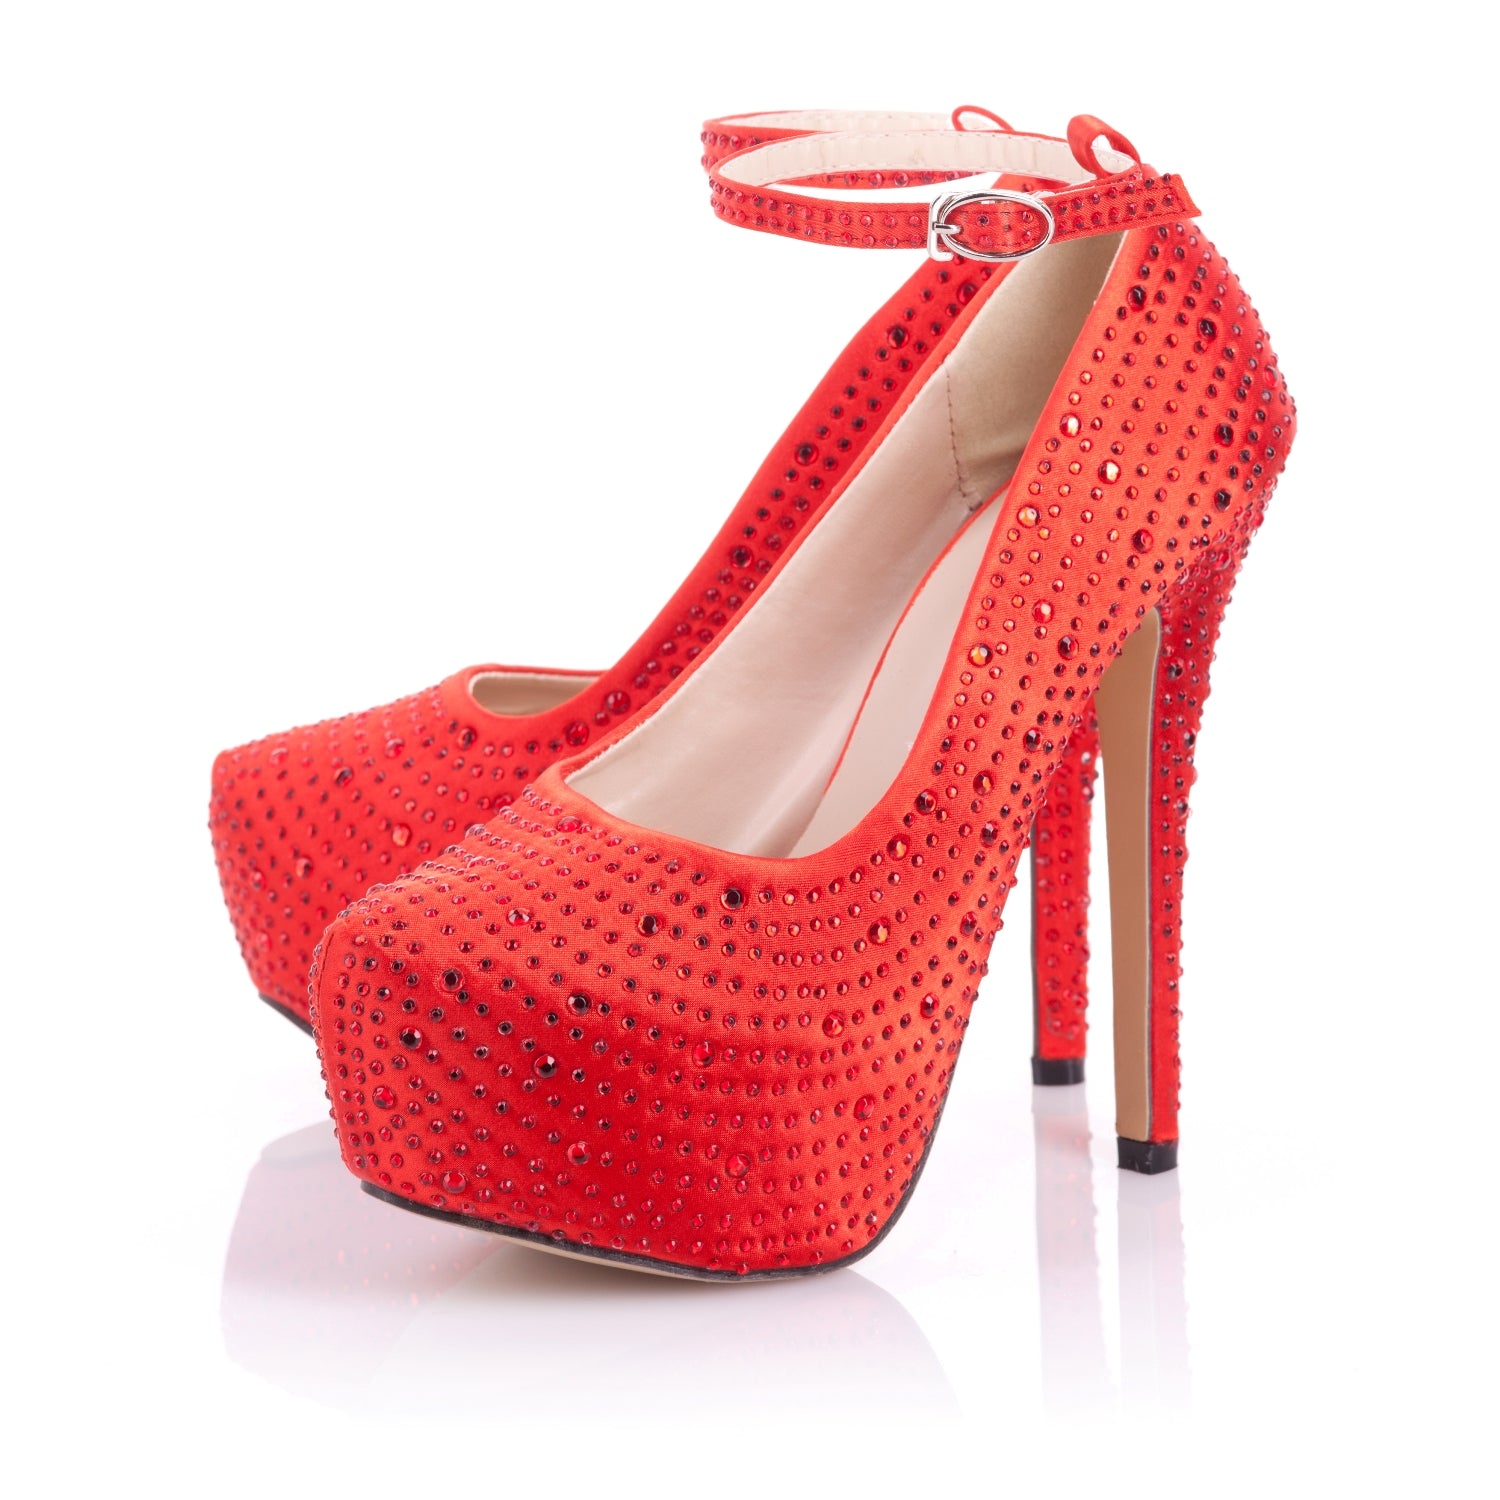 Playgirl Red Satin Shoes With Beautiful Diamontes